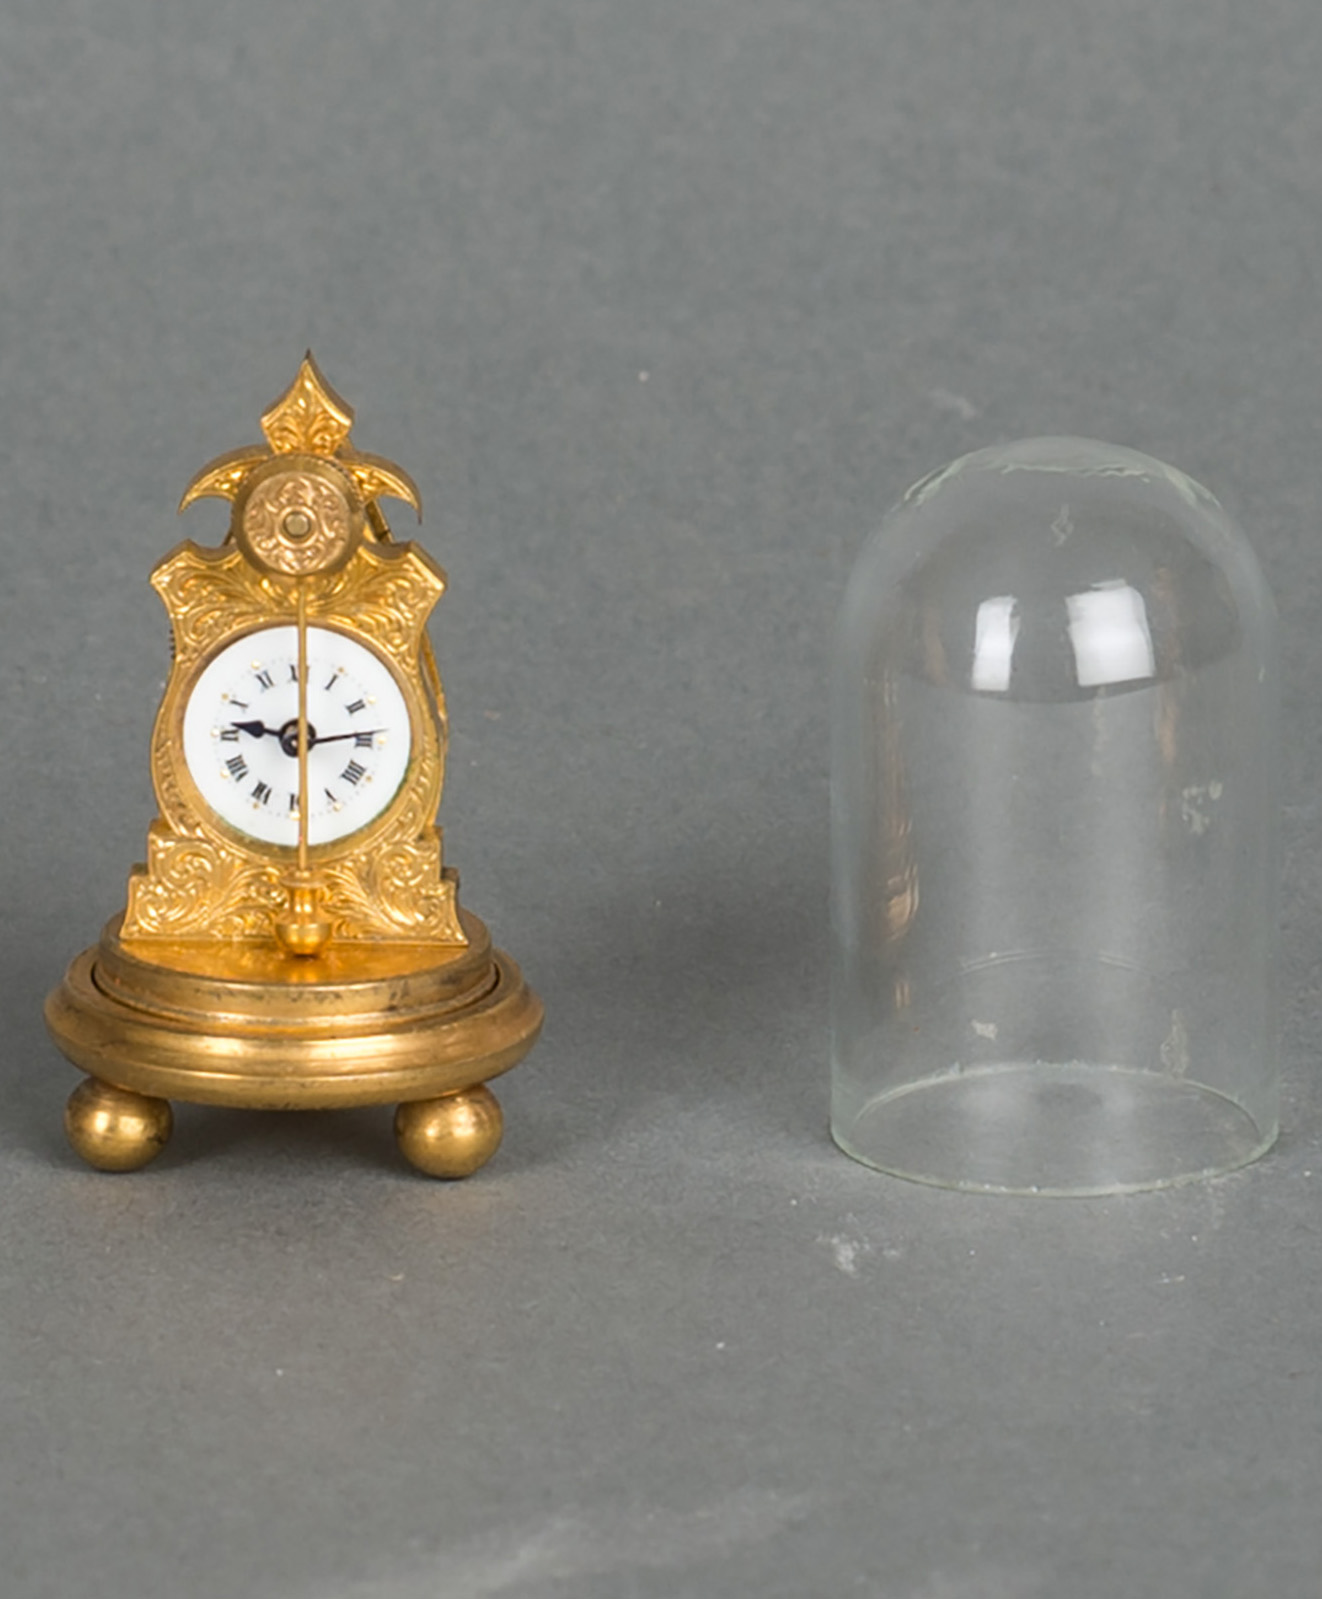 A very small and unusual Austrian ormolu zappler miniature clock with matching dome and enamel dial, circa 1860